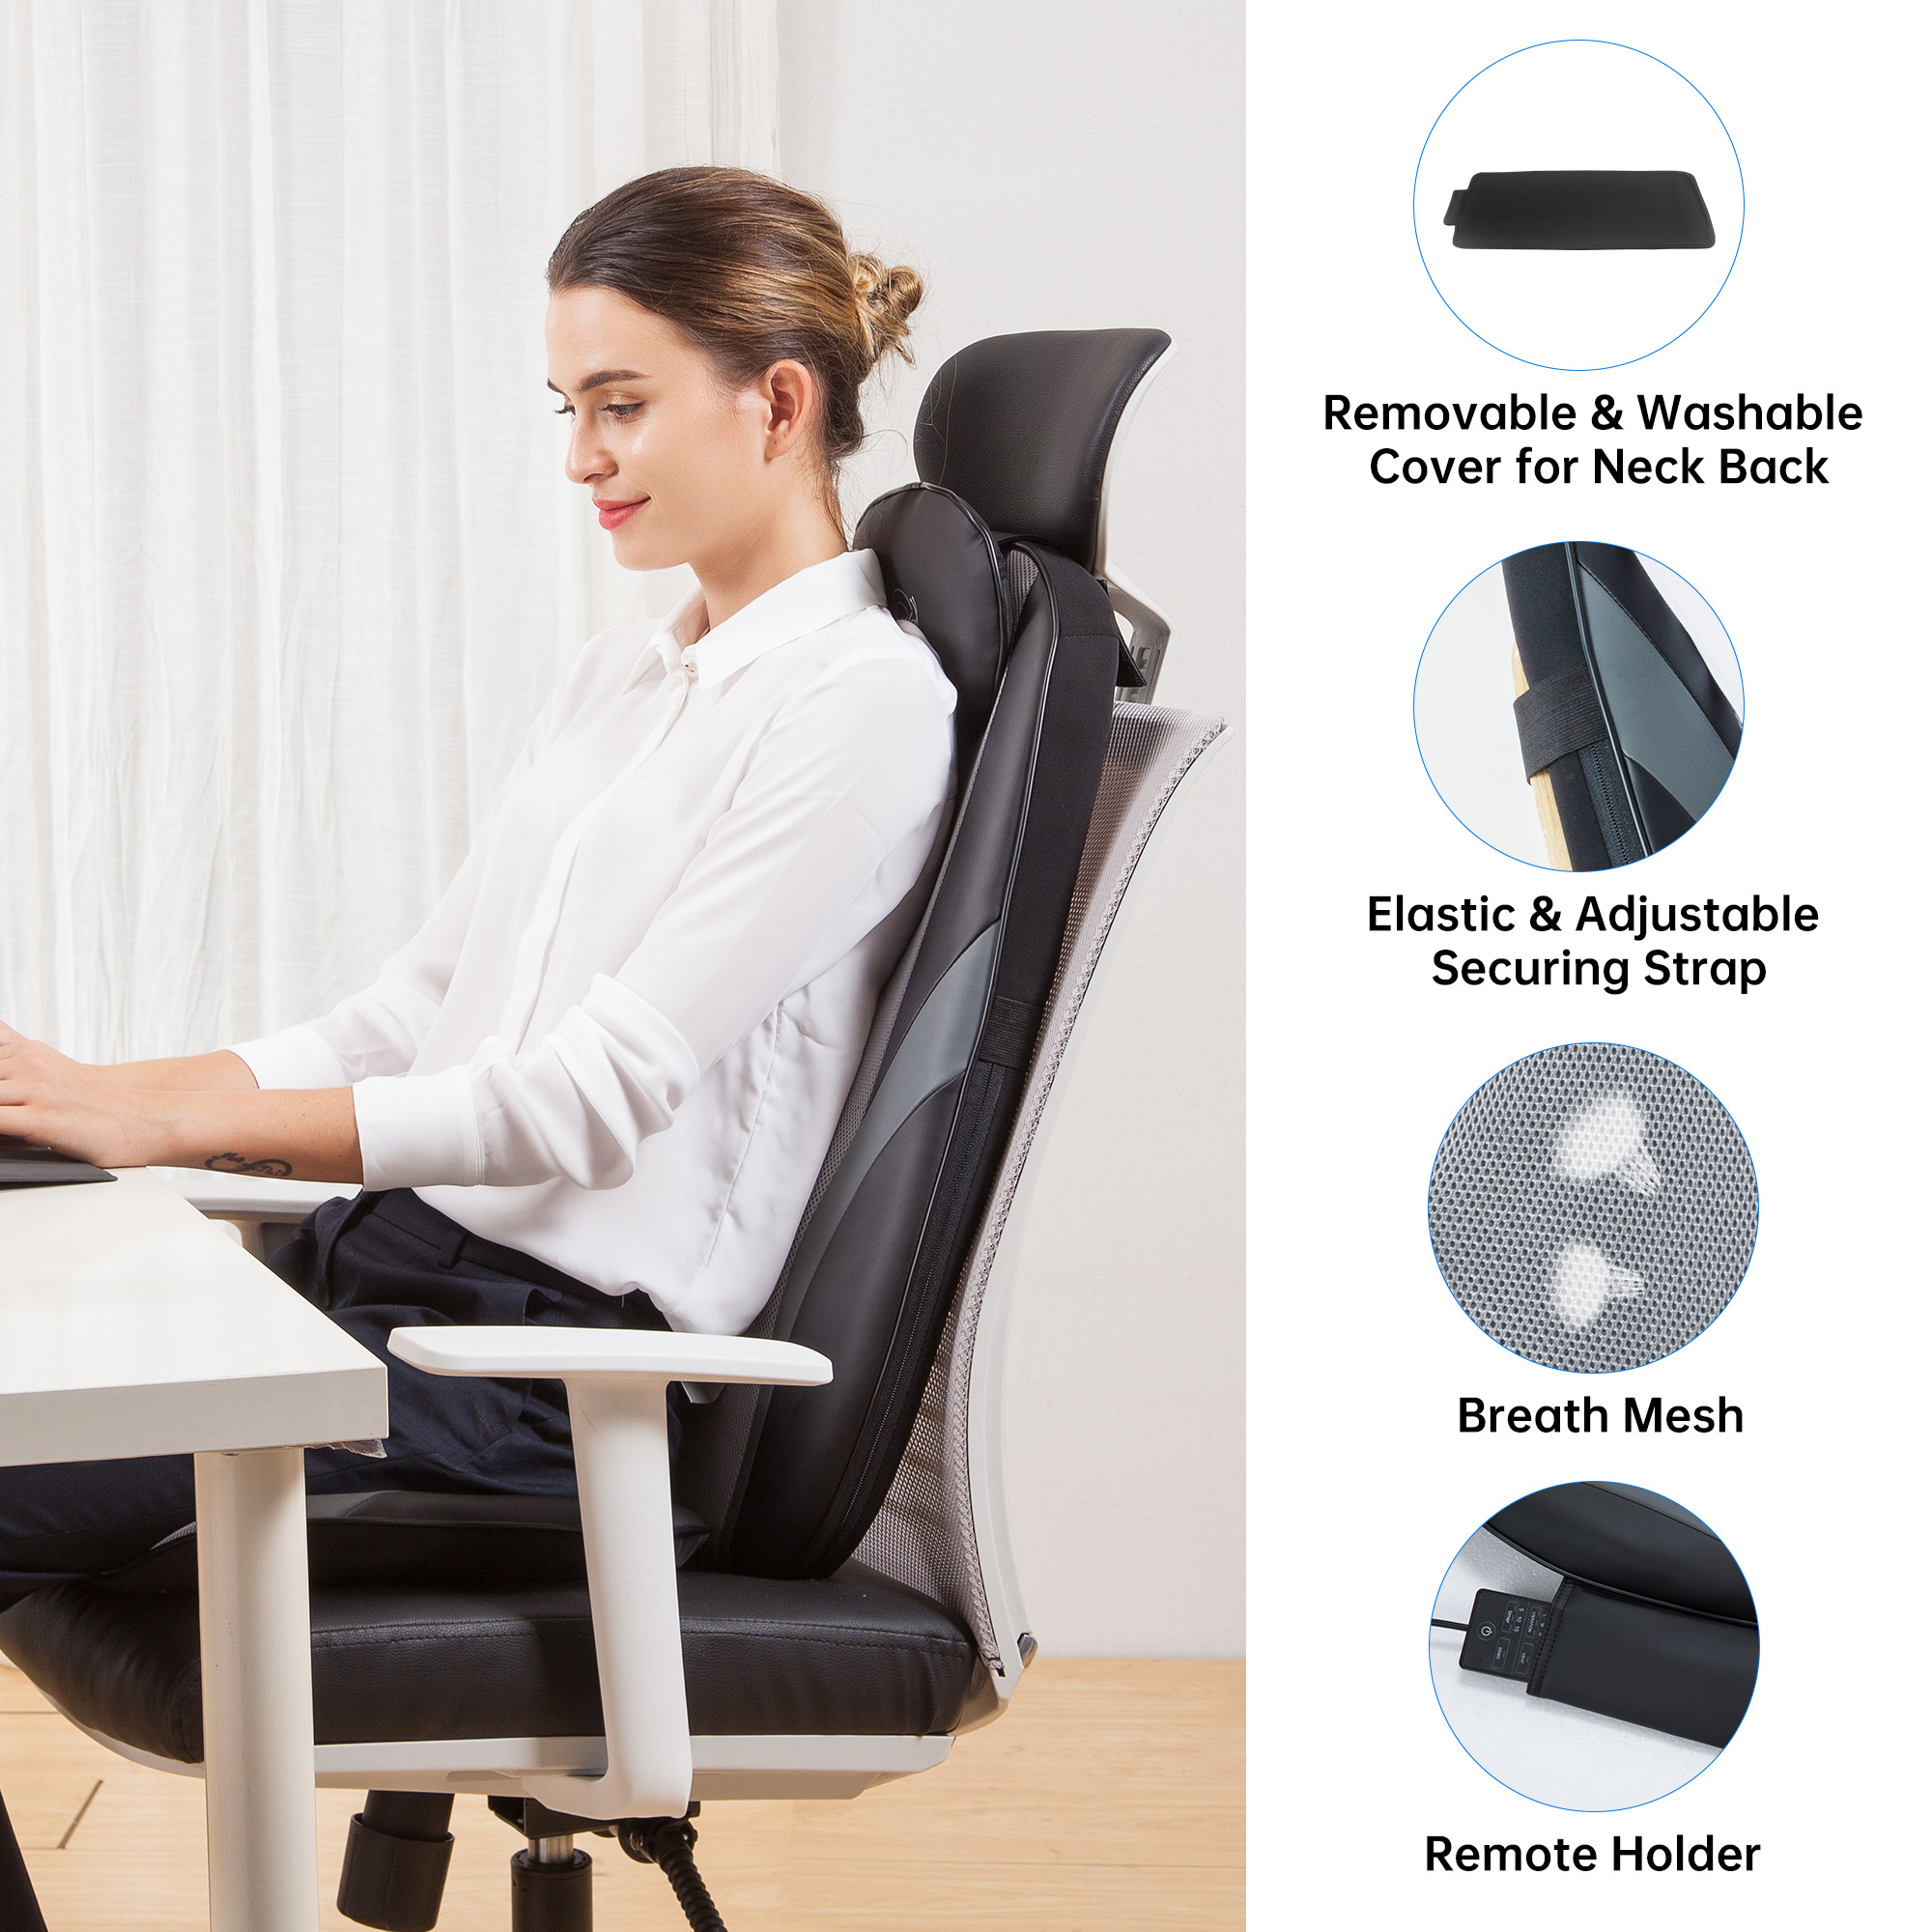 Snailax Shiatsu Neck and Back Massager with Heat, Deep Kneading Massage Chair Pad, Seat Cushion Massager with Gel, Gifts - image 3 of 7